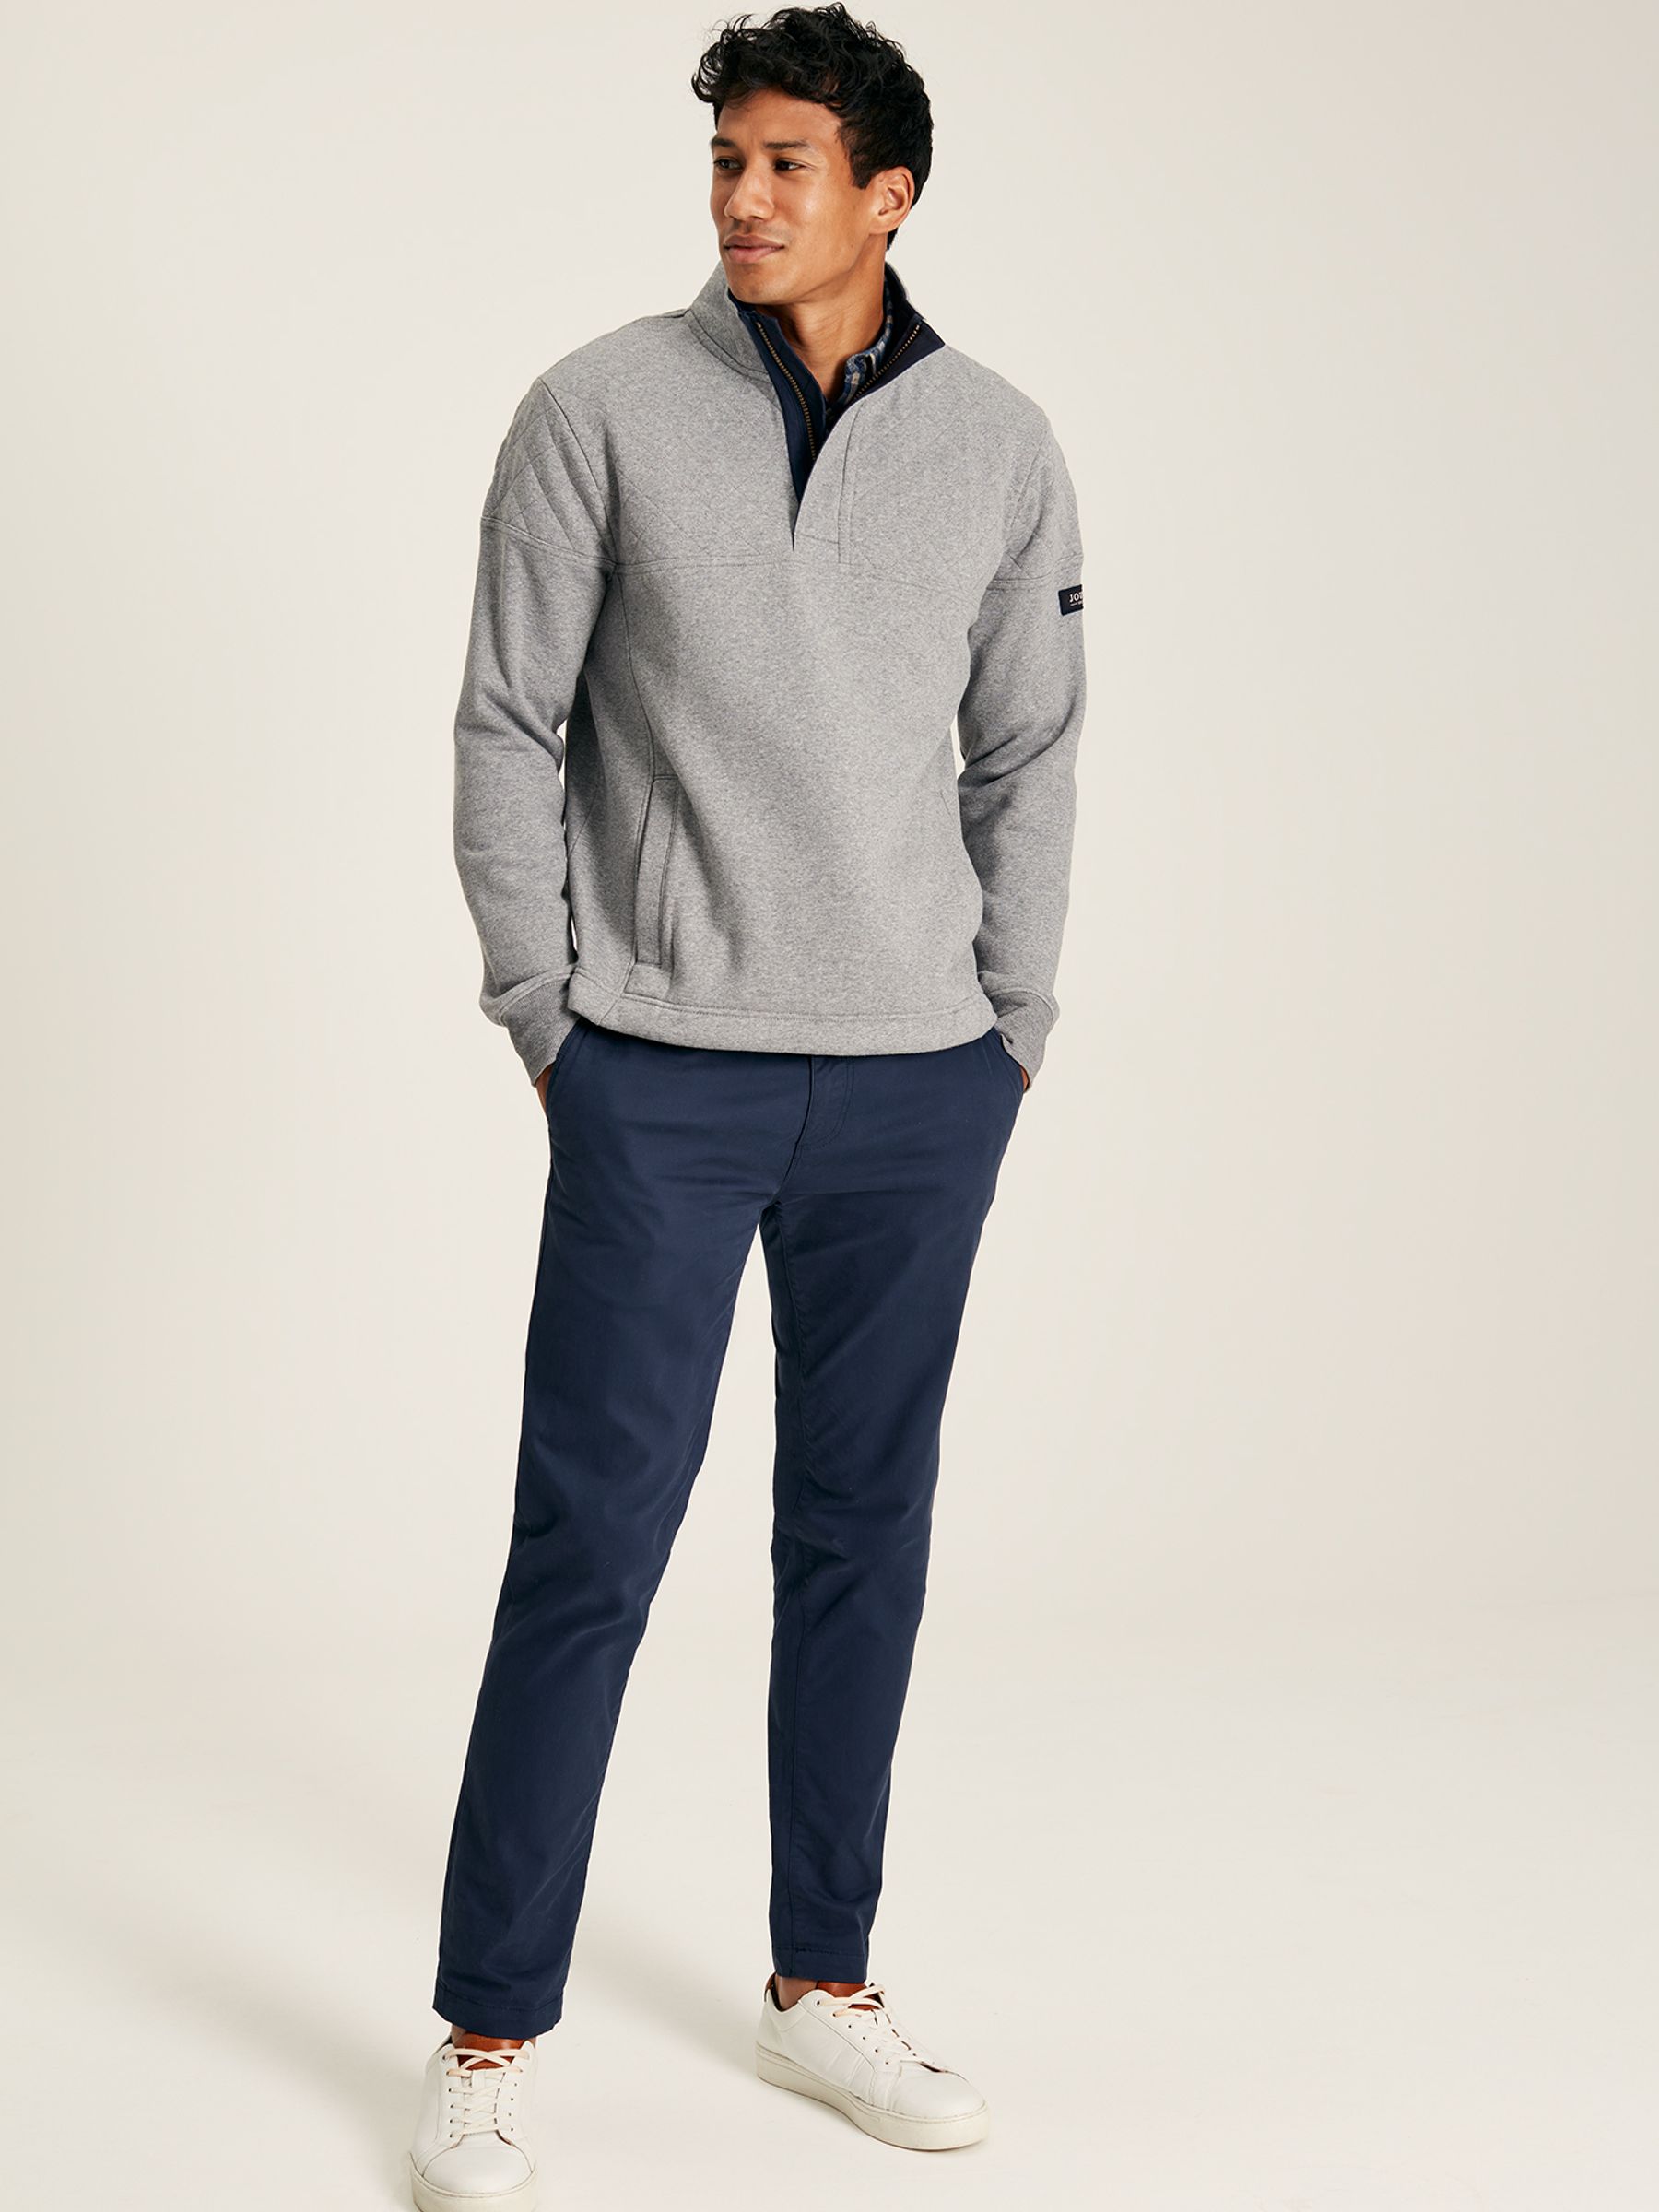 Buy Joules Darrington Quarter Zip Sweater from the Joules online shop